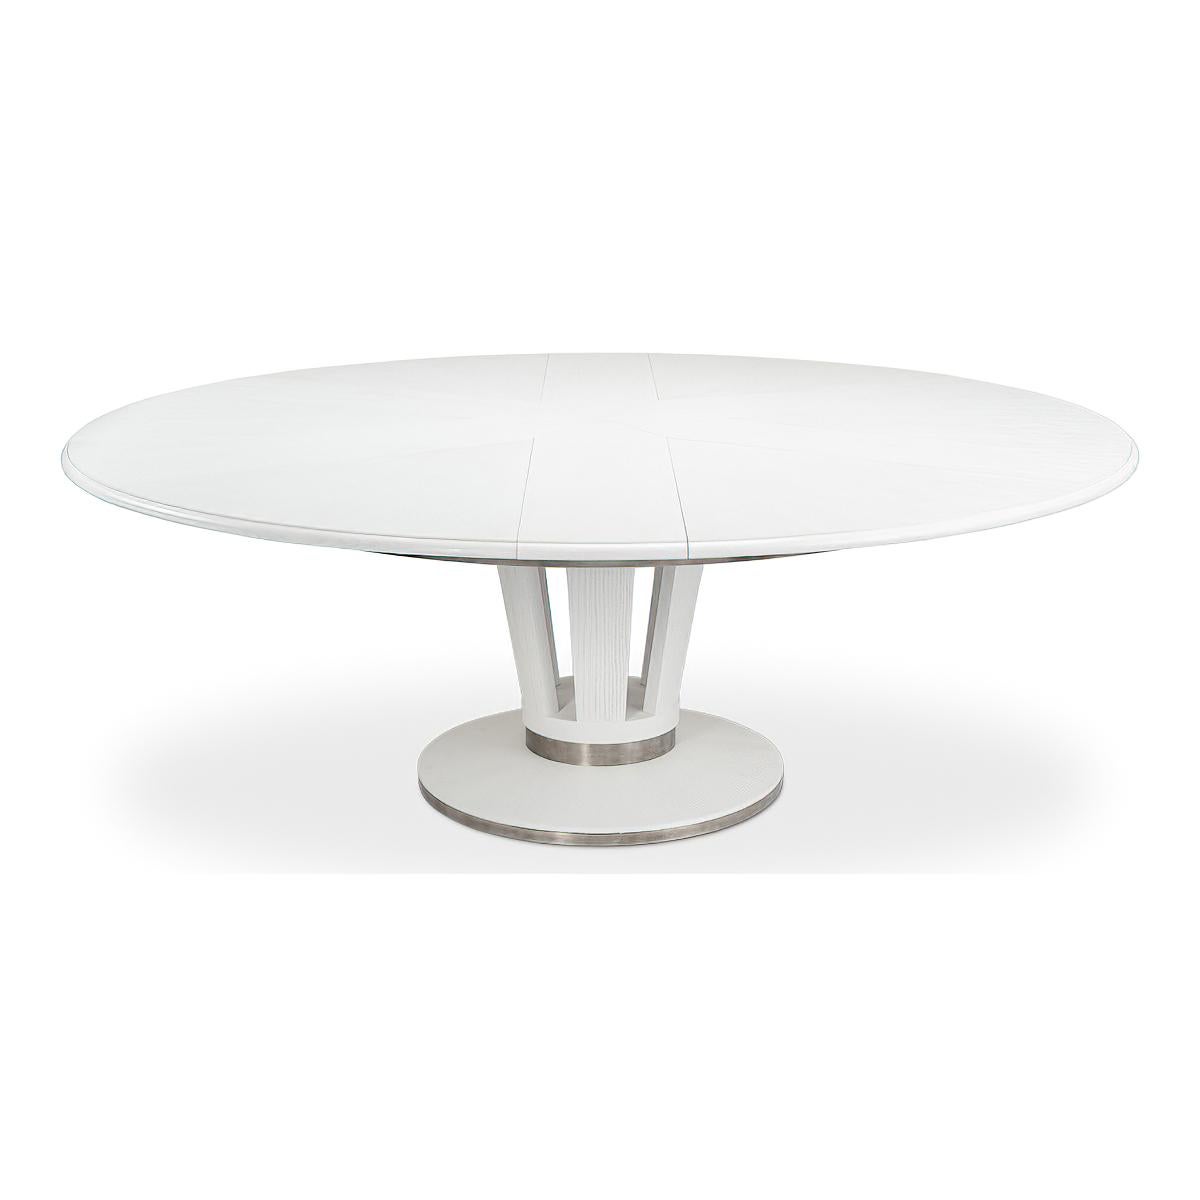 Vietnamese Mid Century Style Extension Dining Table, Bold White